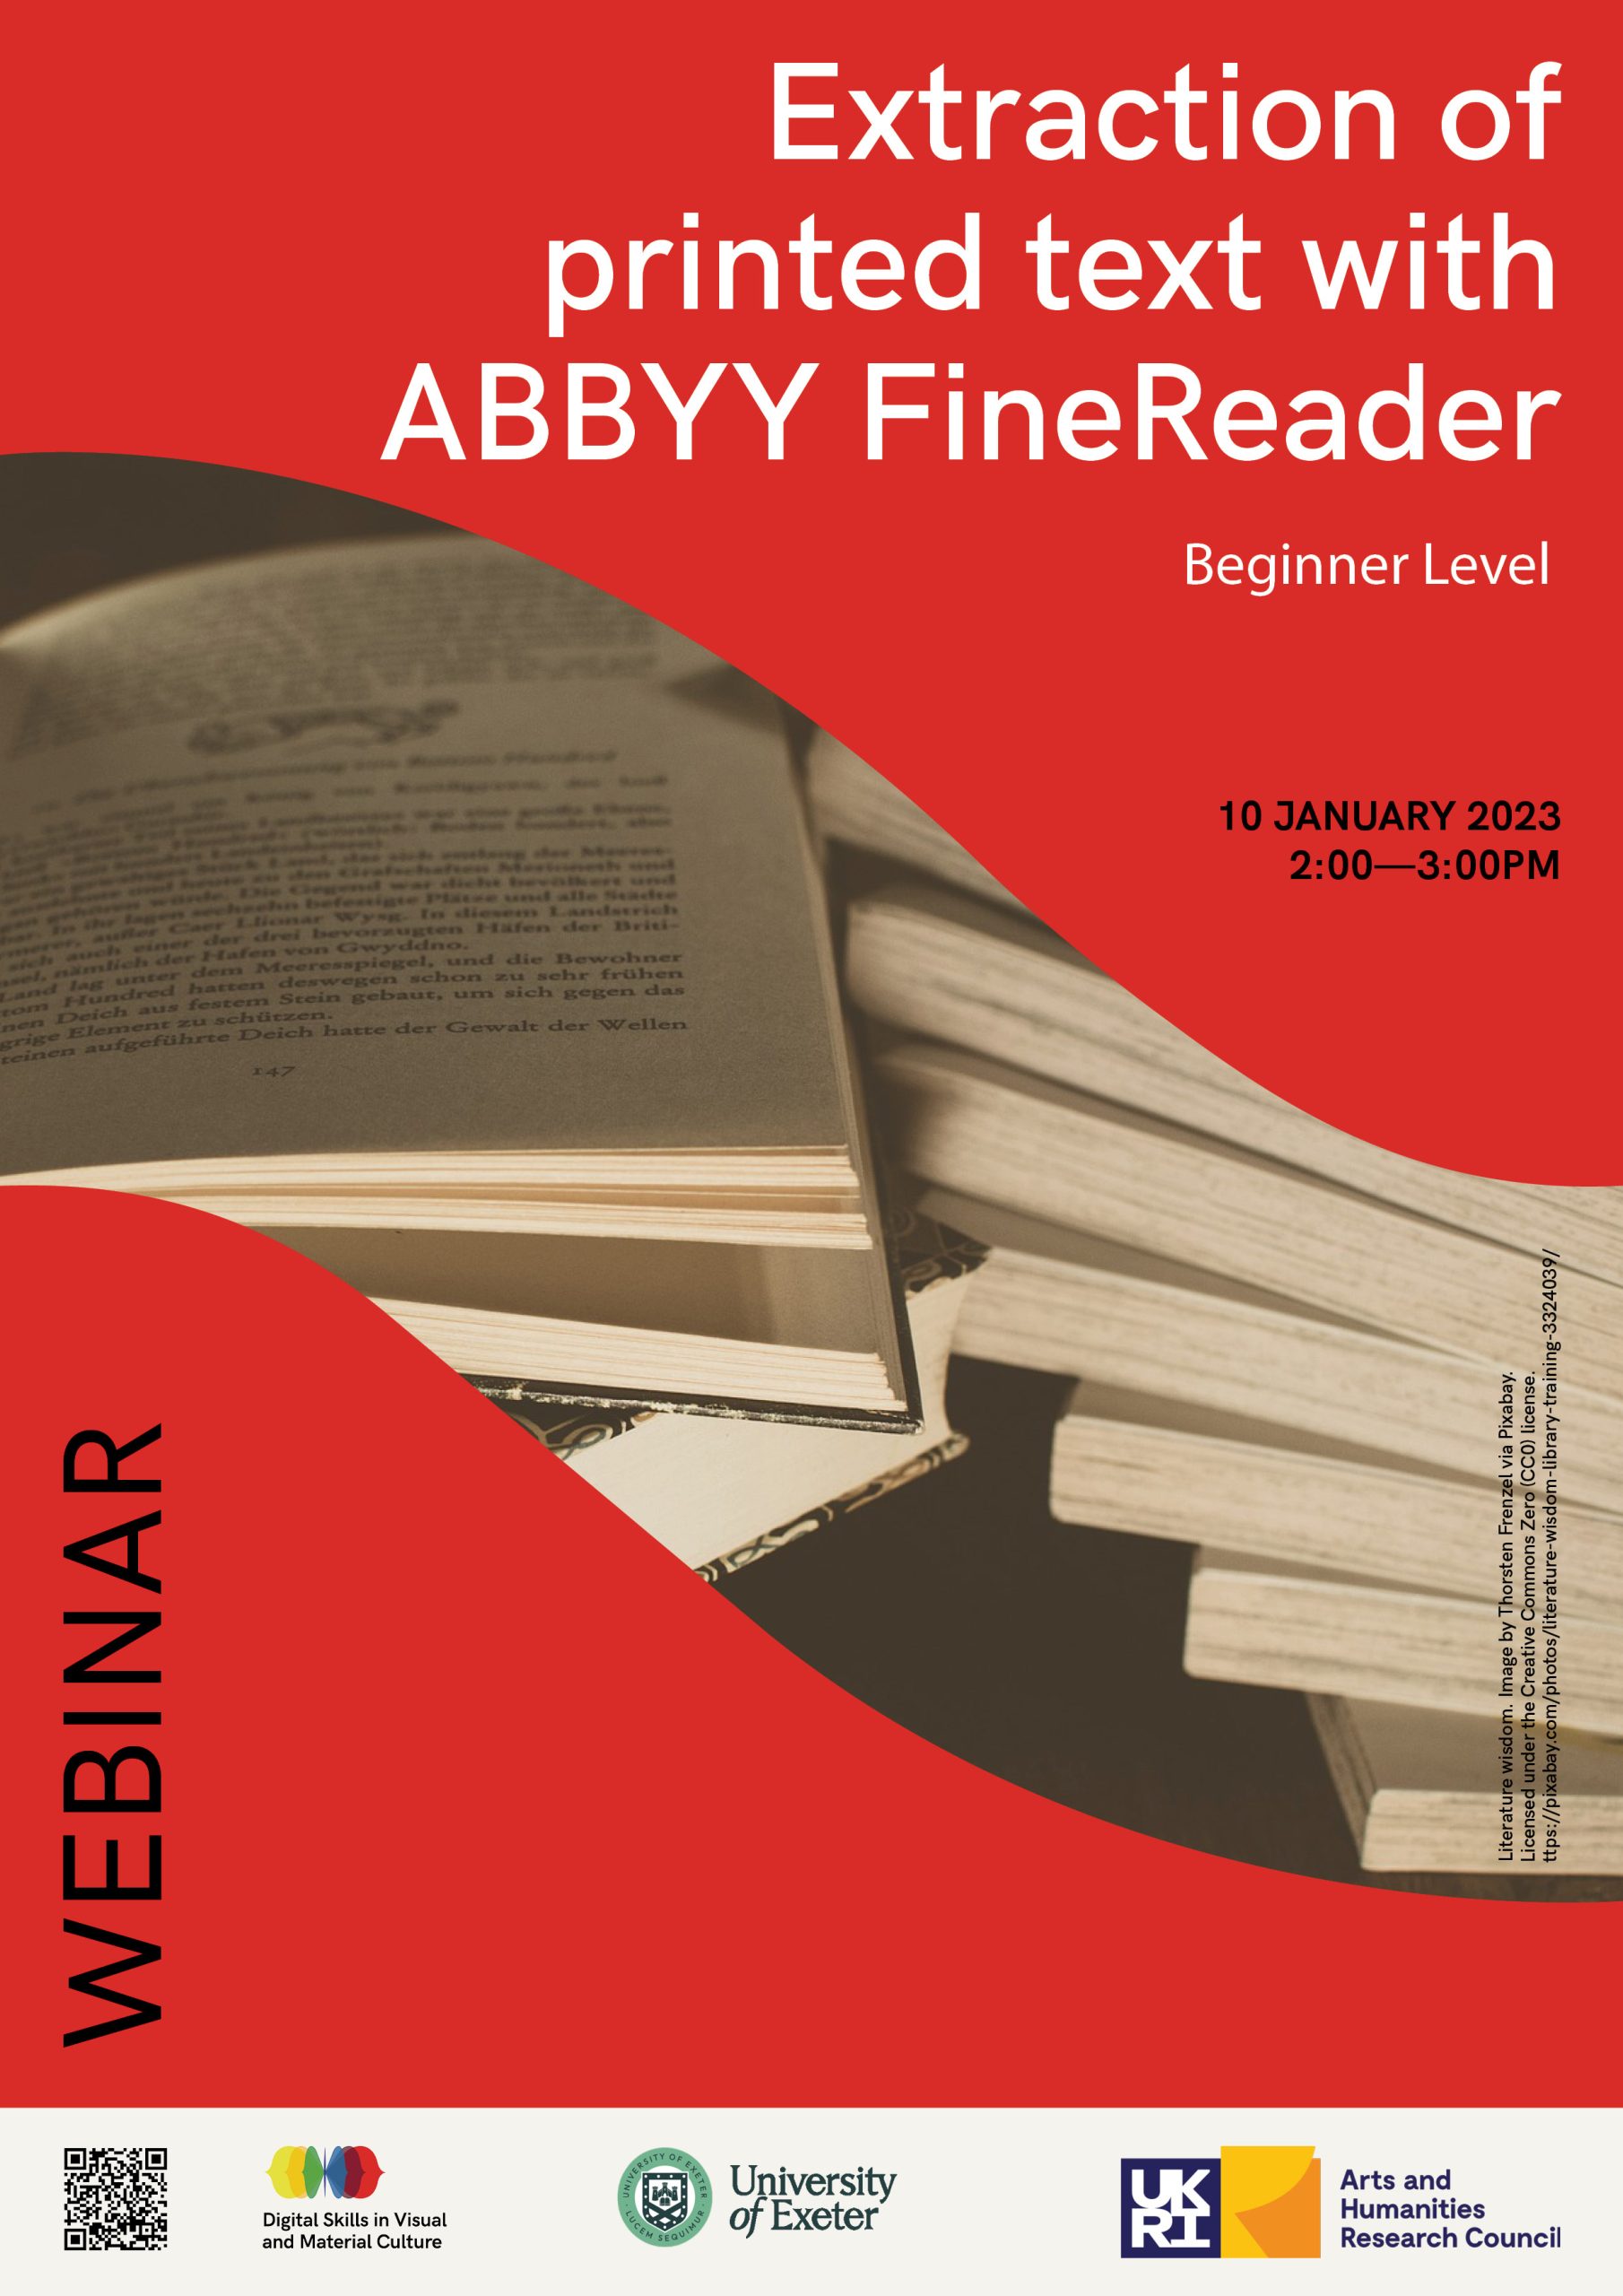 Webinar: Extraction of printed text with ABBYY FineReader (beginner level)